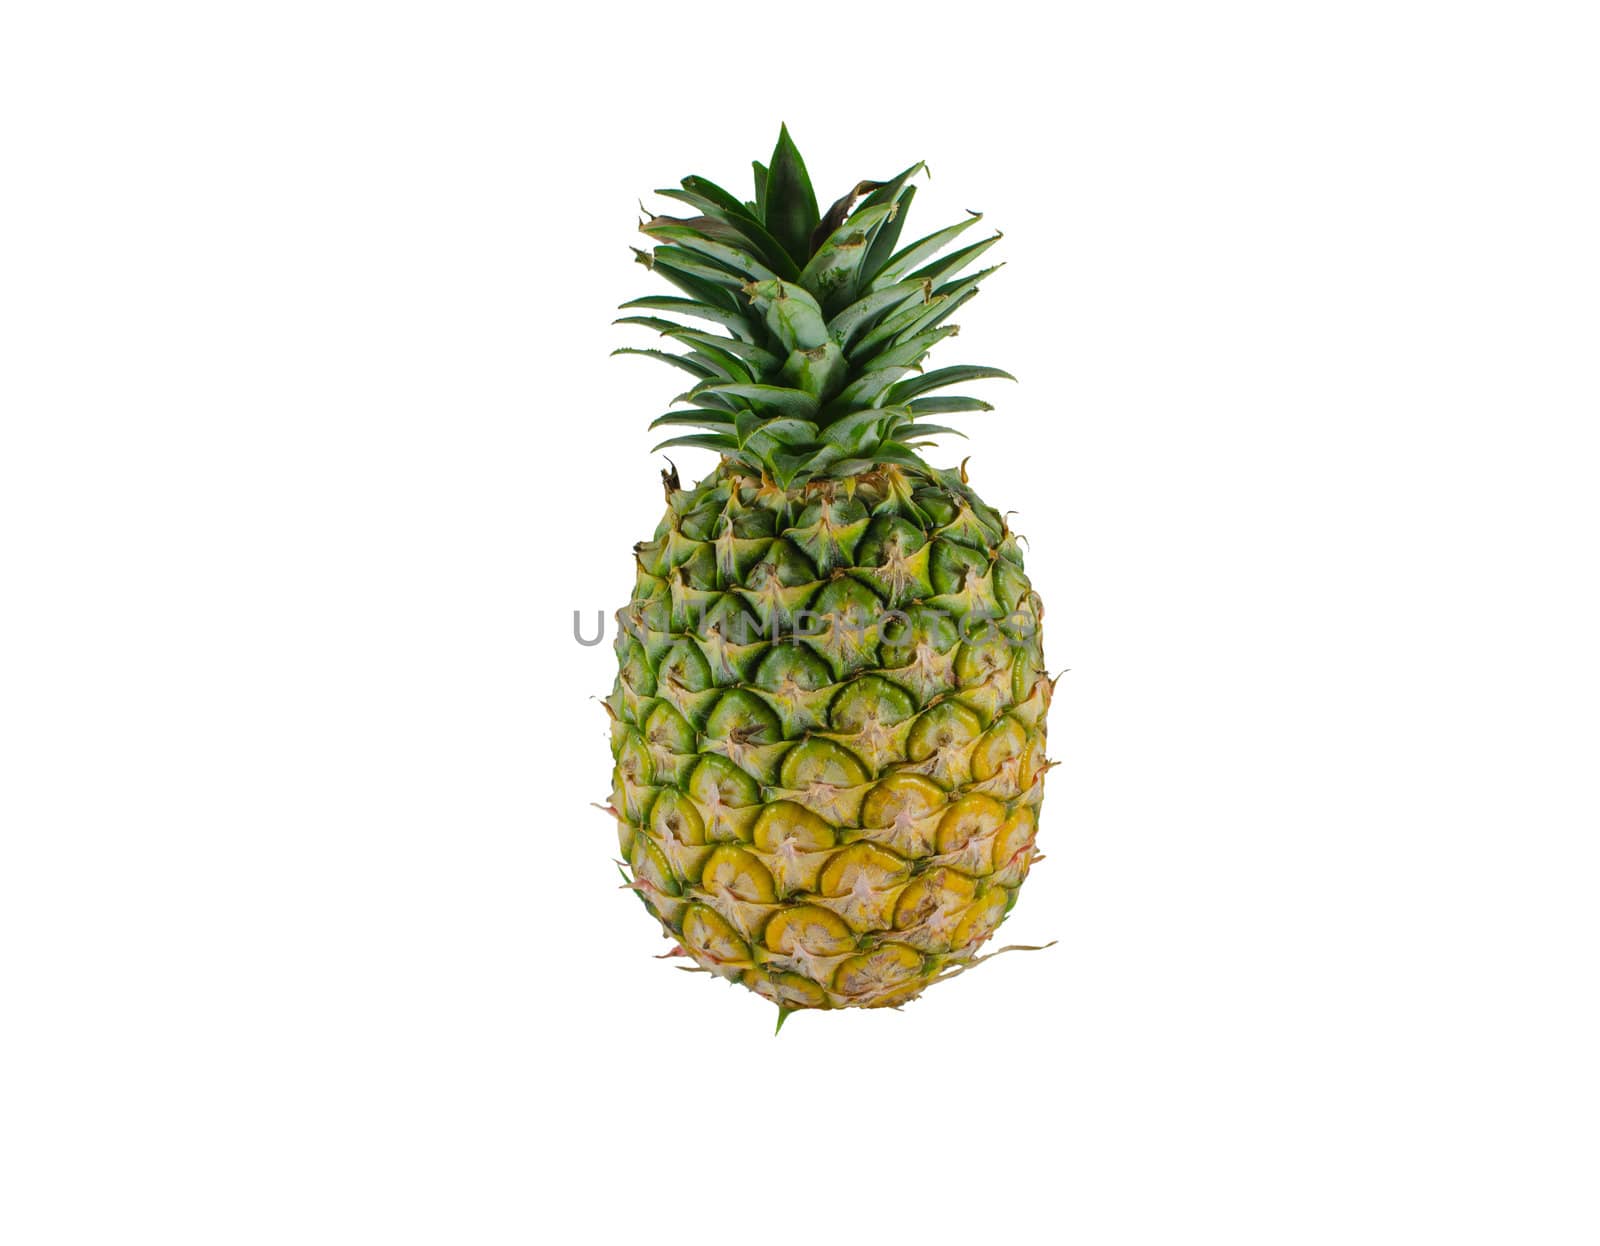 Colorful pineapple at a white background